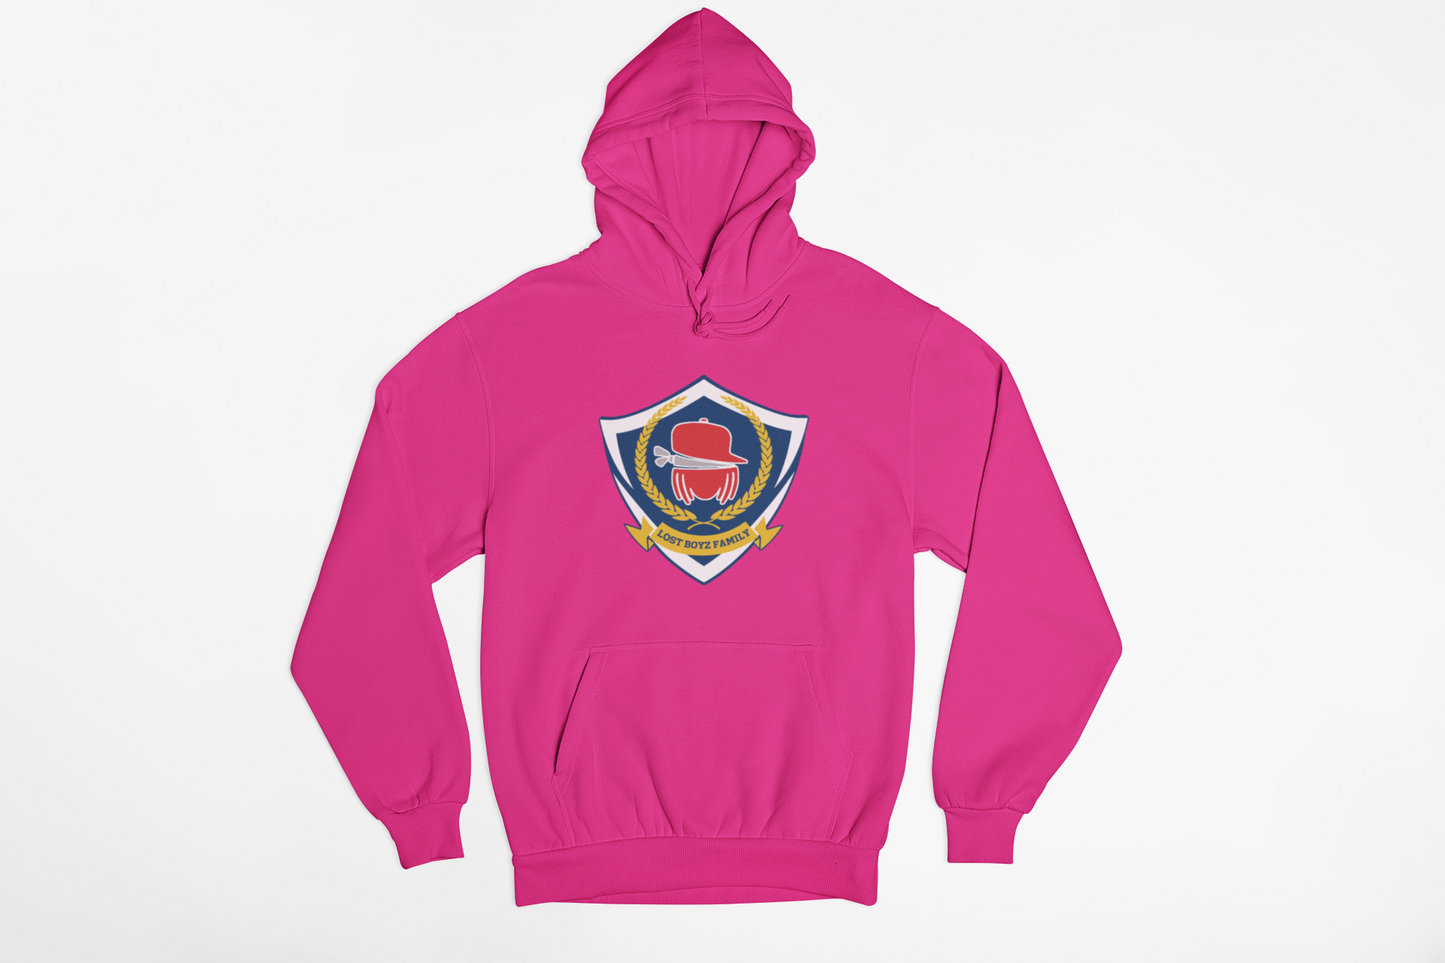 Lost Boyz Family Crest Hoodie (Blue/Gold/Red)